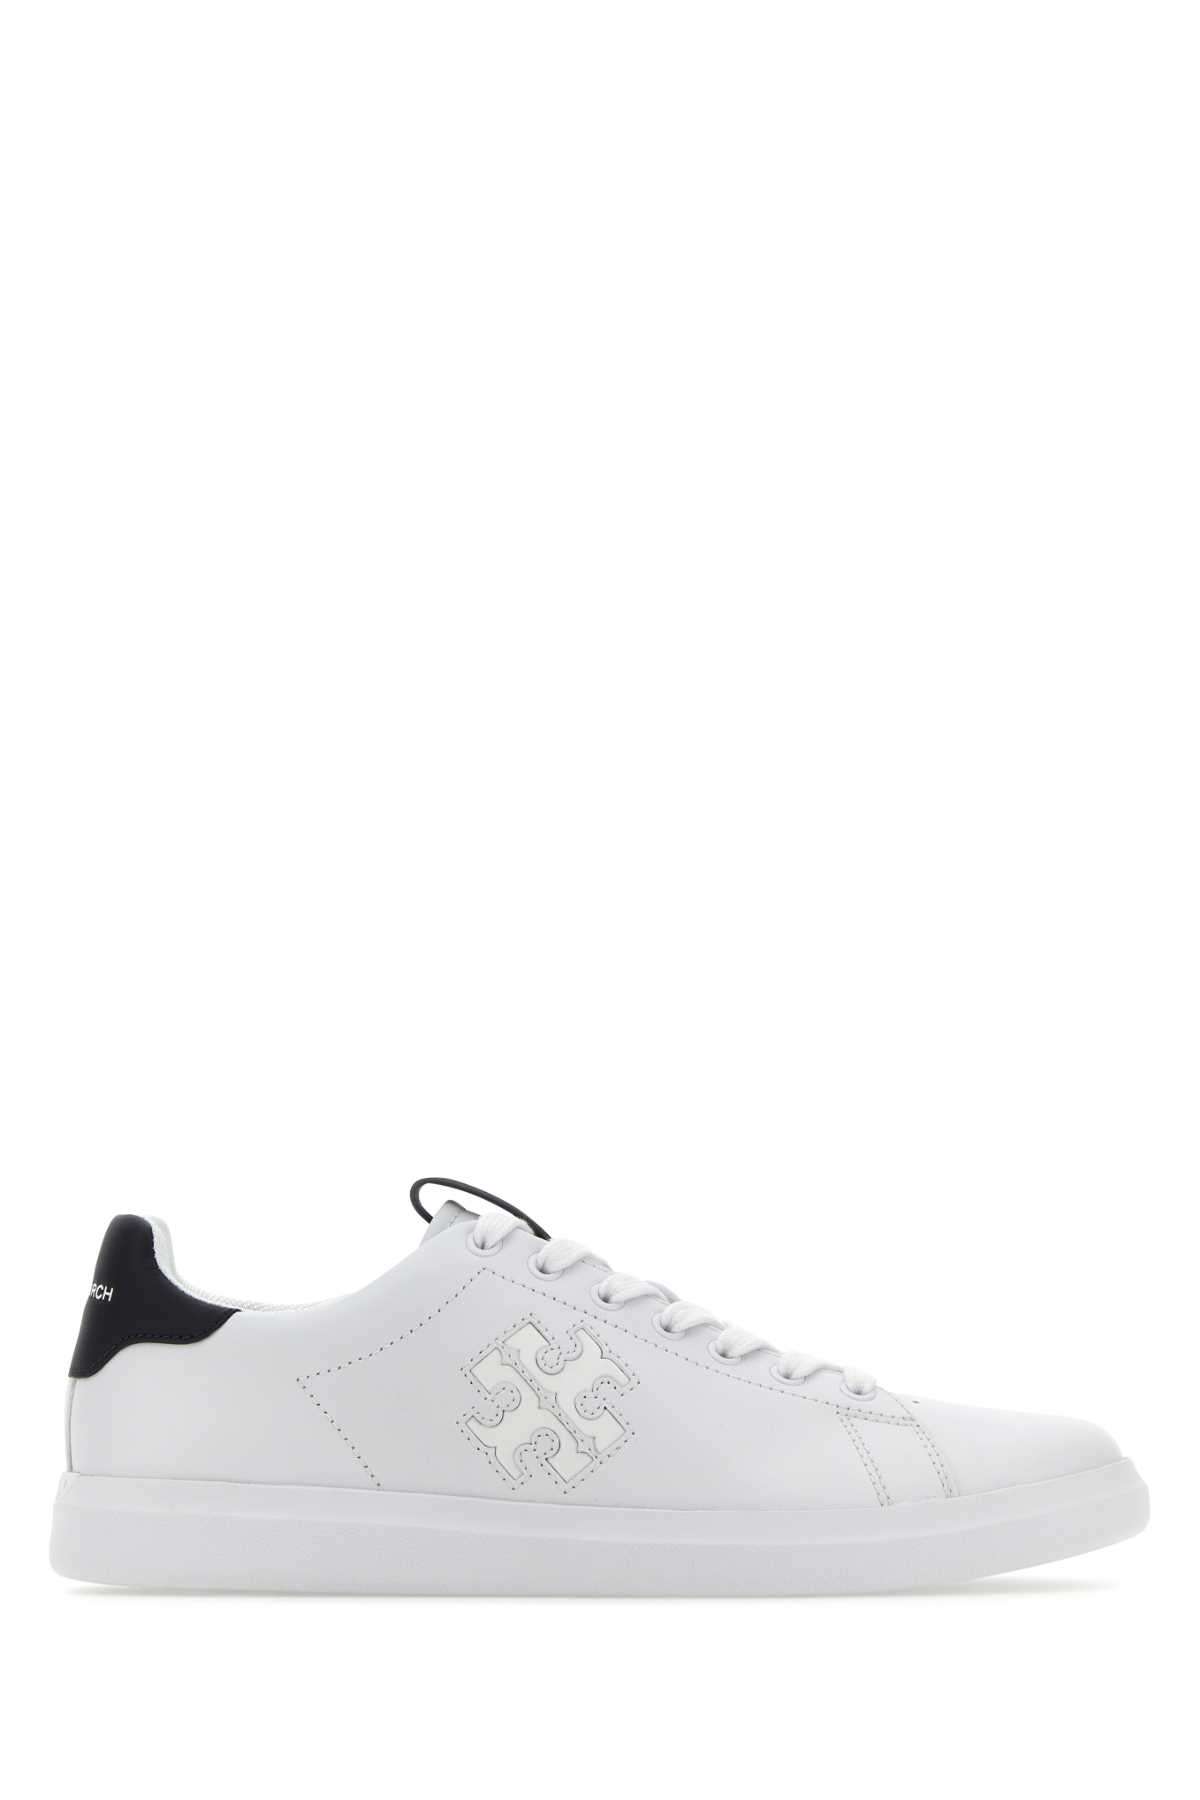 Shop Tory Burch Chalk Leather Howell Court Sneakers In Whiteperfectnavy